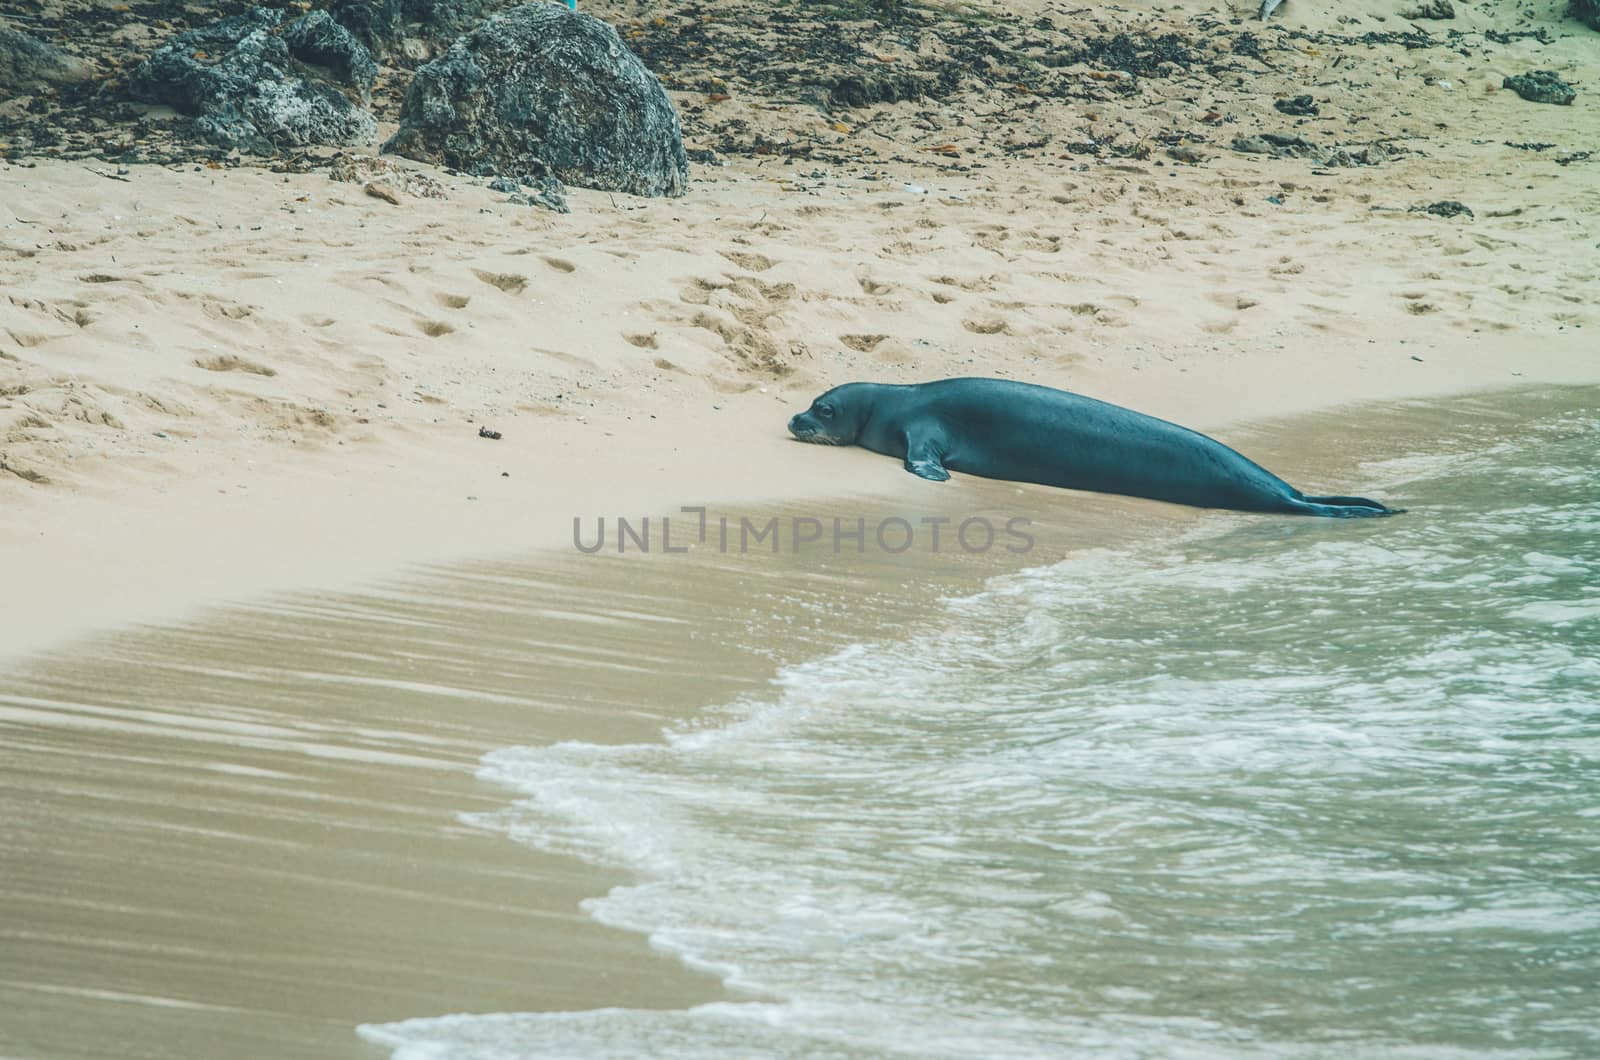 Monk seal walk out of the water in Hawaii, US. by mikelju